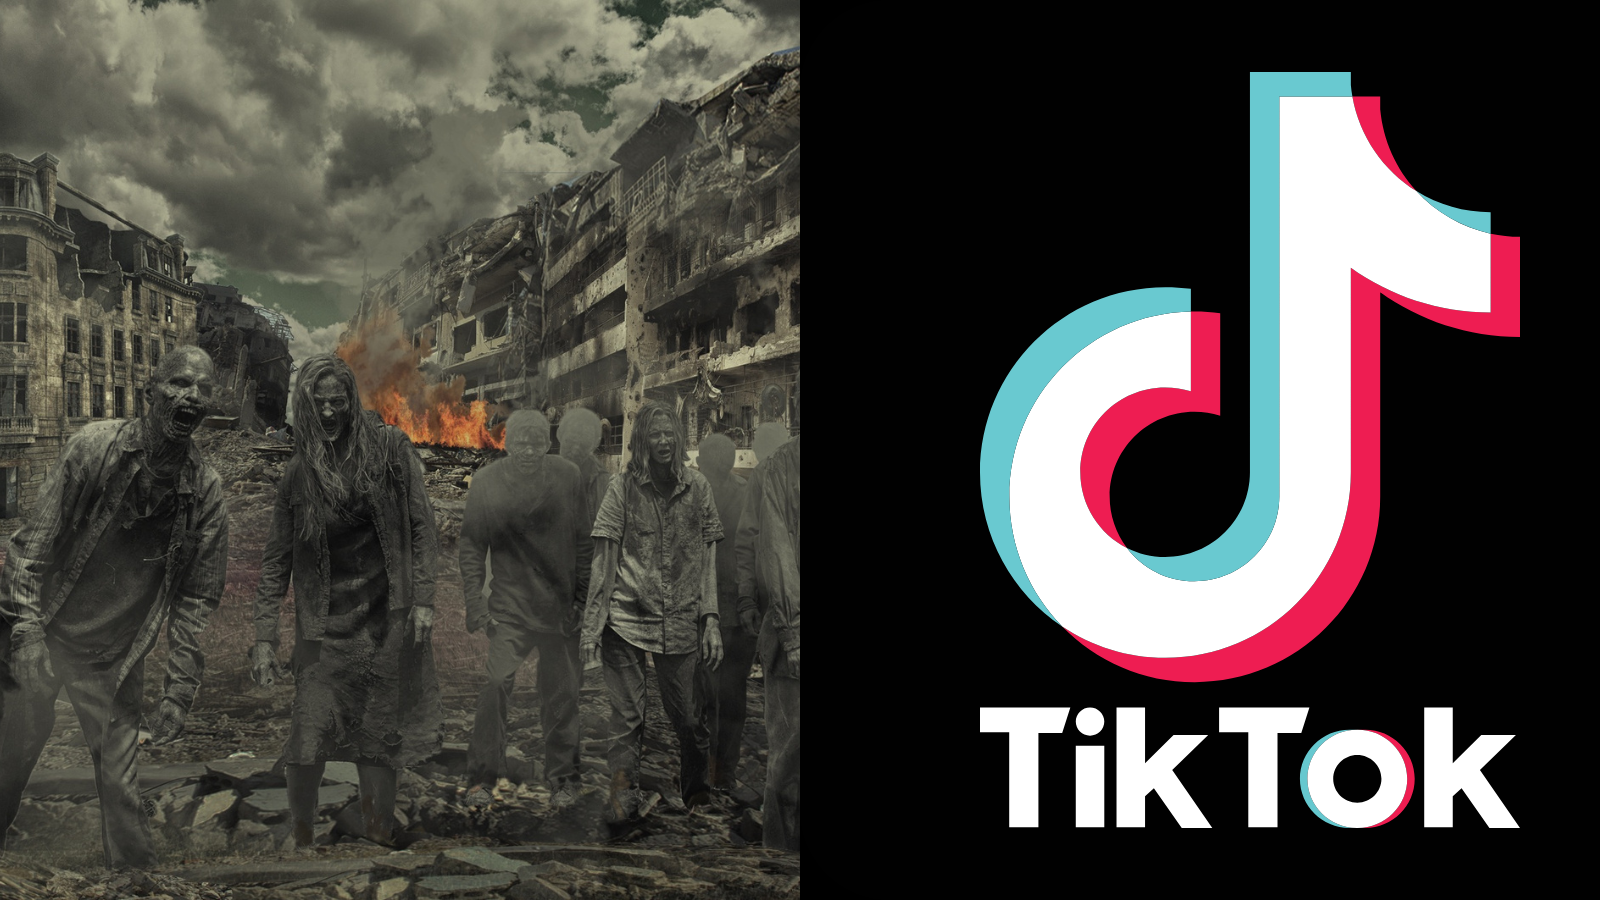 Is There Really a Zombie Outbreak in China? Viral TikTok Theory, Explained